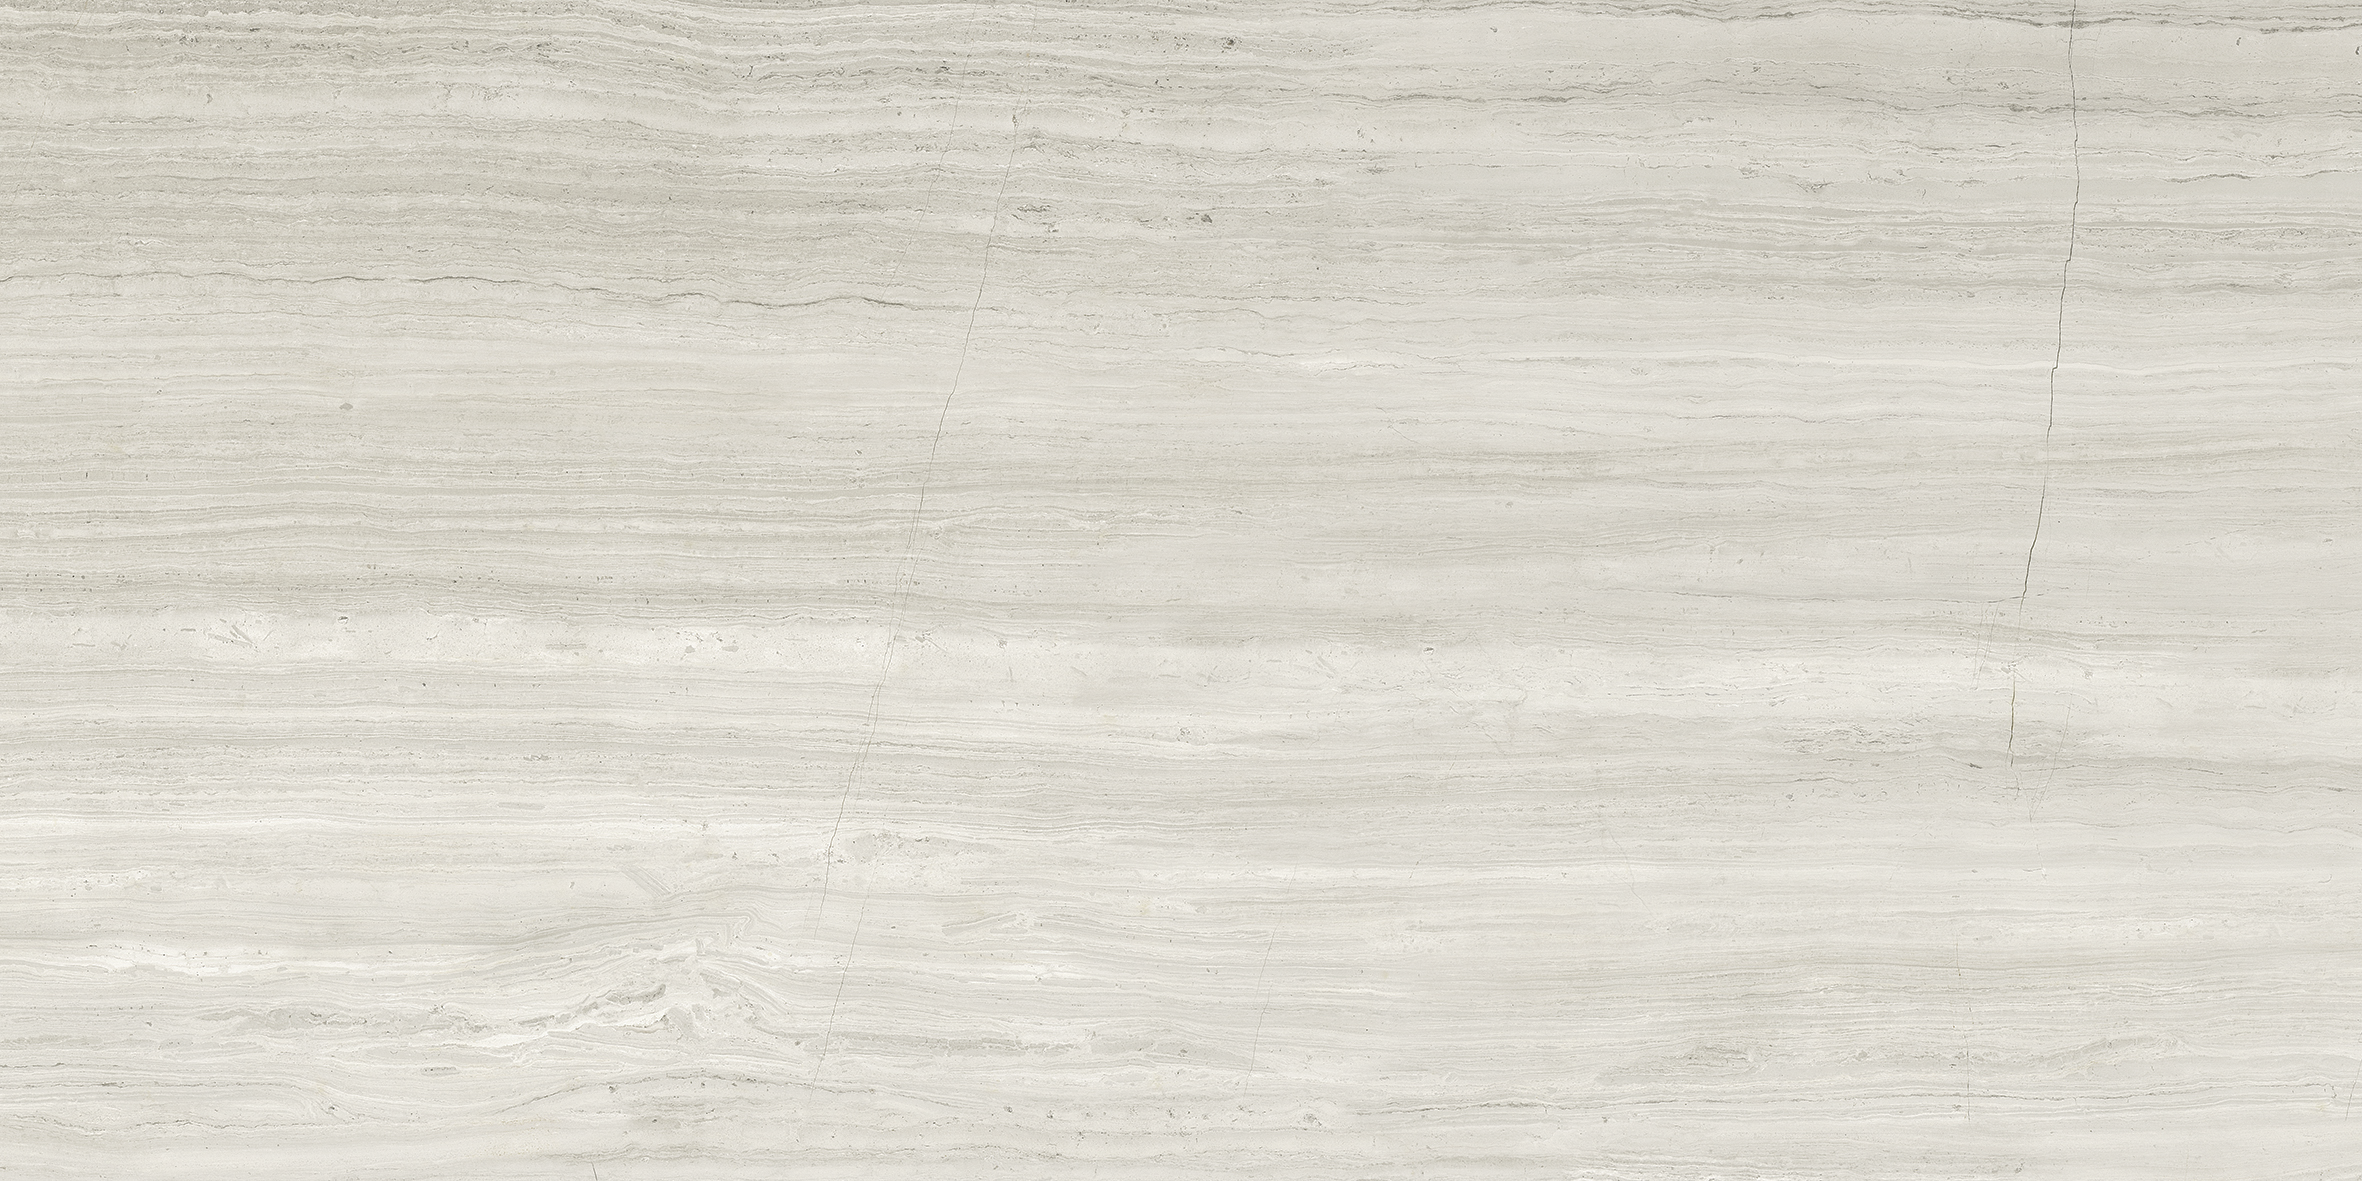 strada ash pattern glazed porcelain field tile from mayfair anatolia collection distributed by surface group international polished finish rectified edge 12x24 rectangle shape